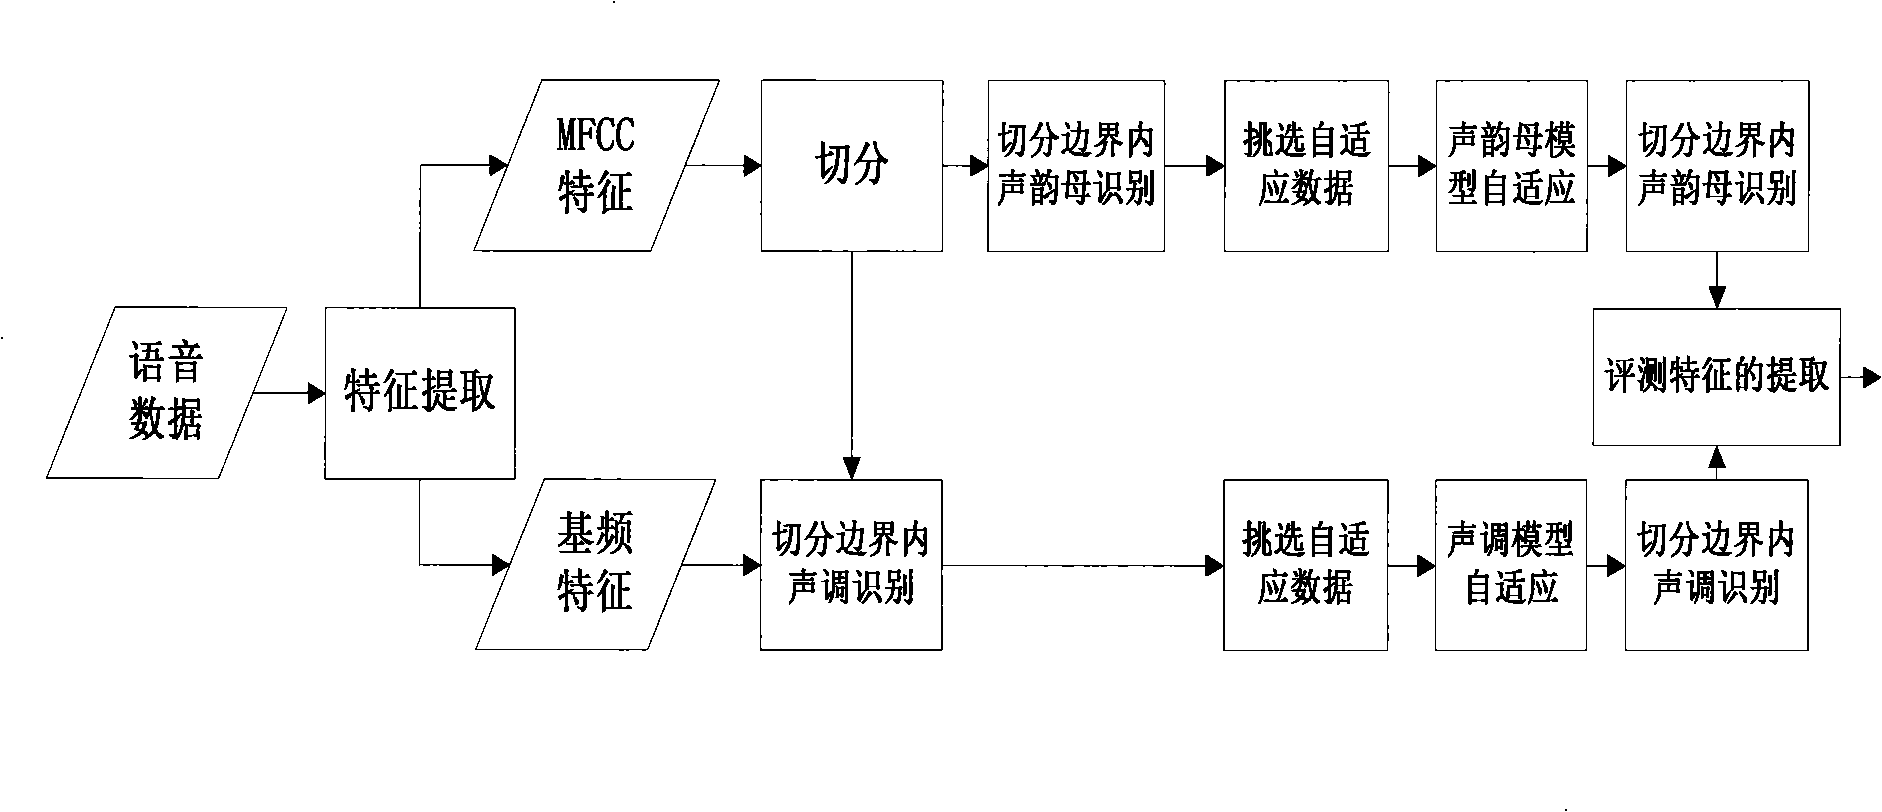 Self-adapting method aiming at computer language learning system pronunciation evaluation